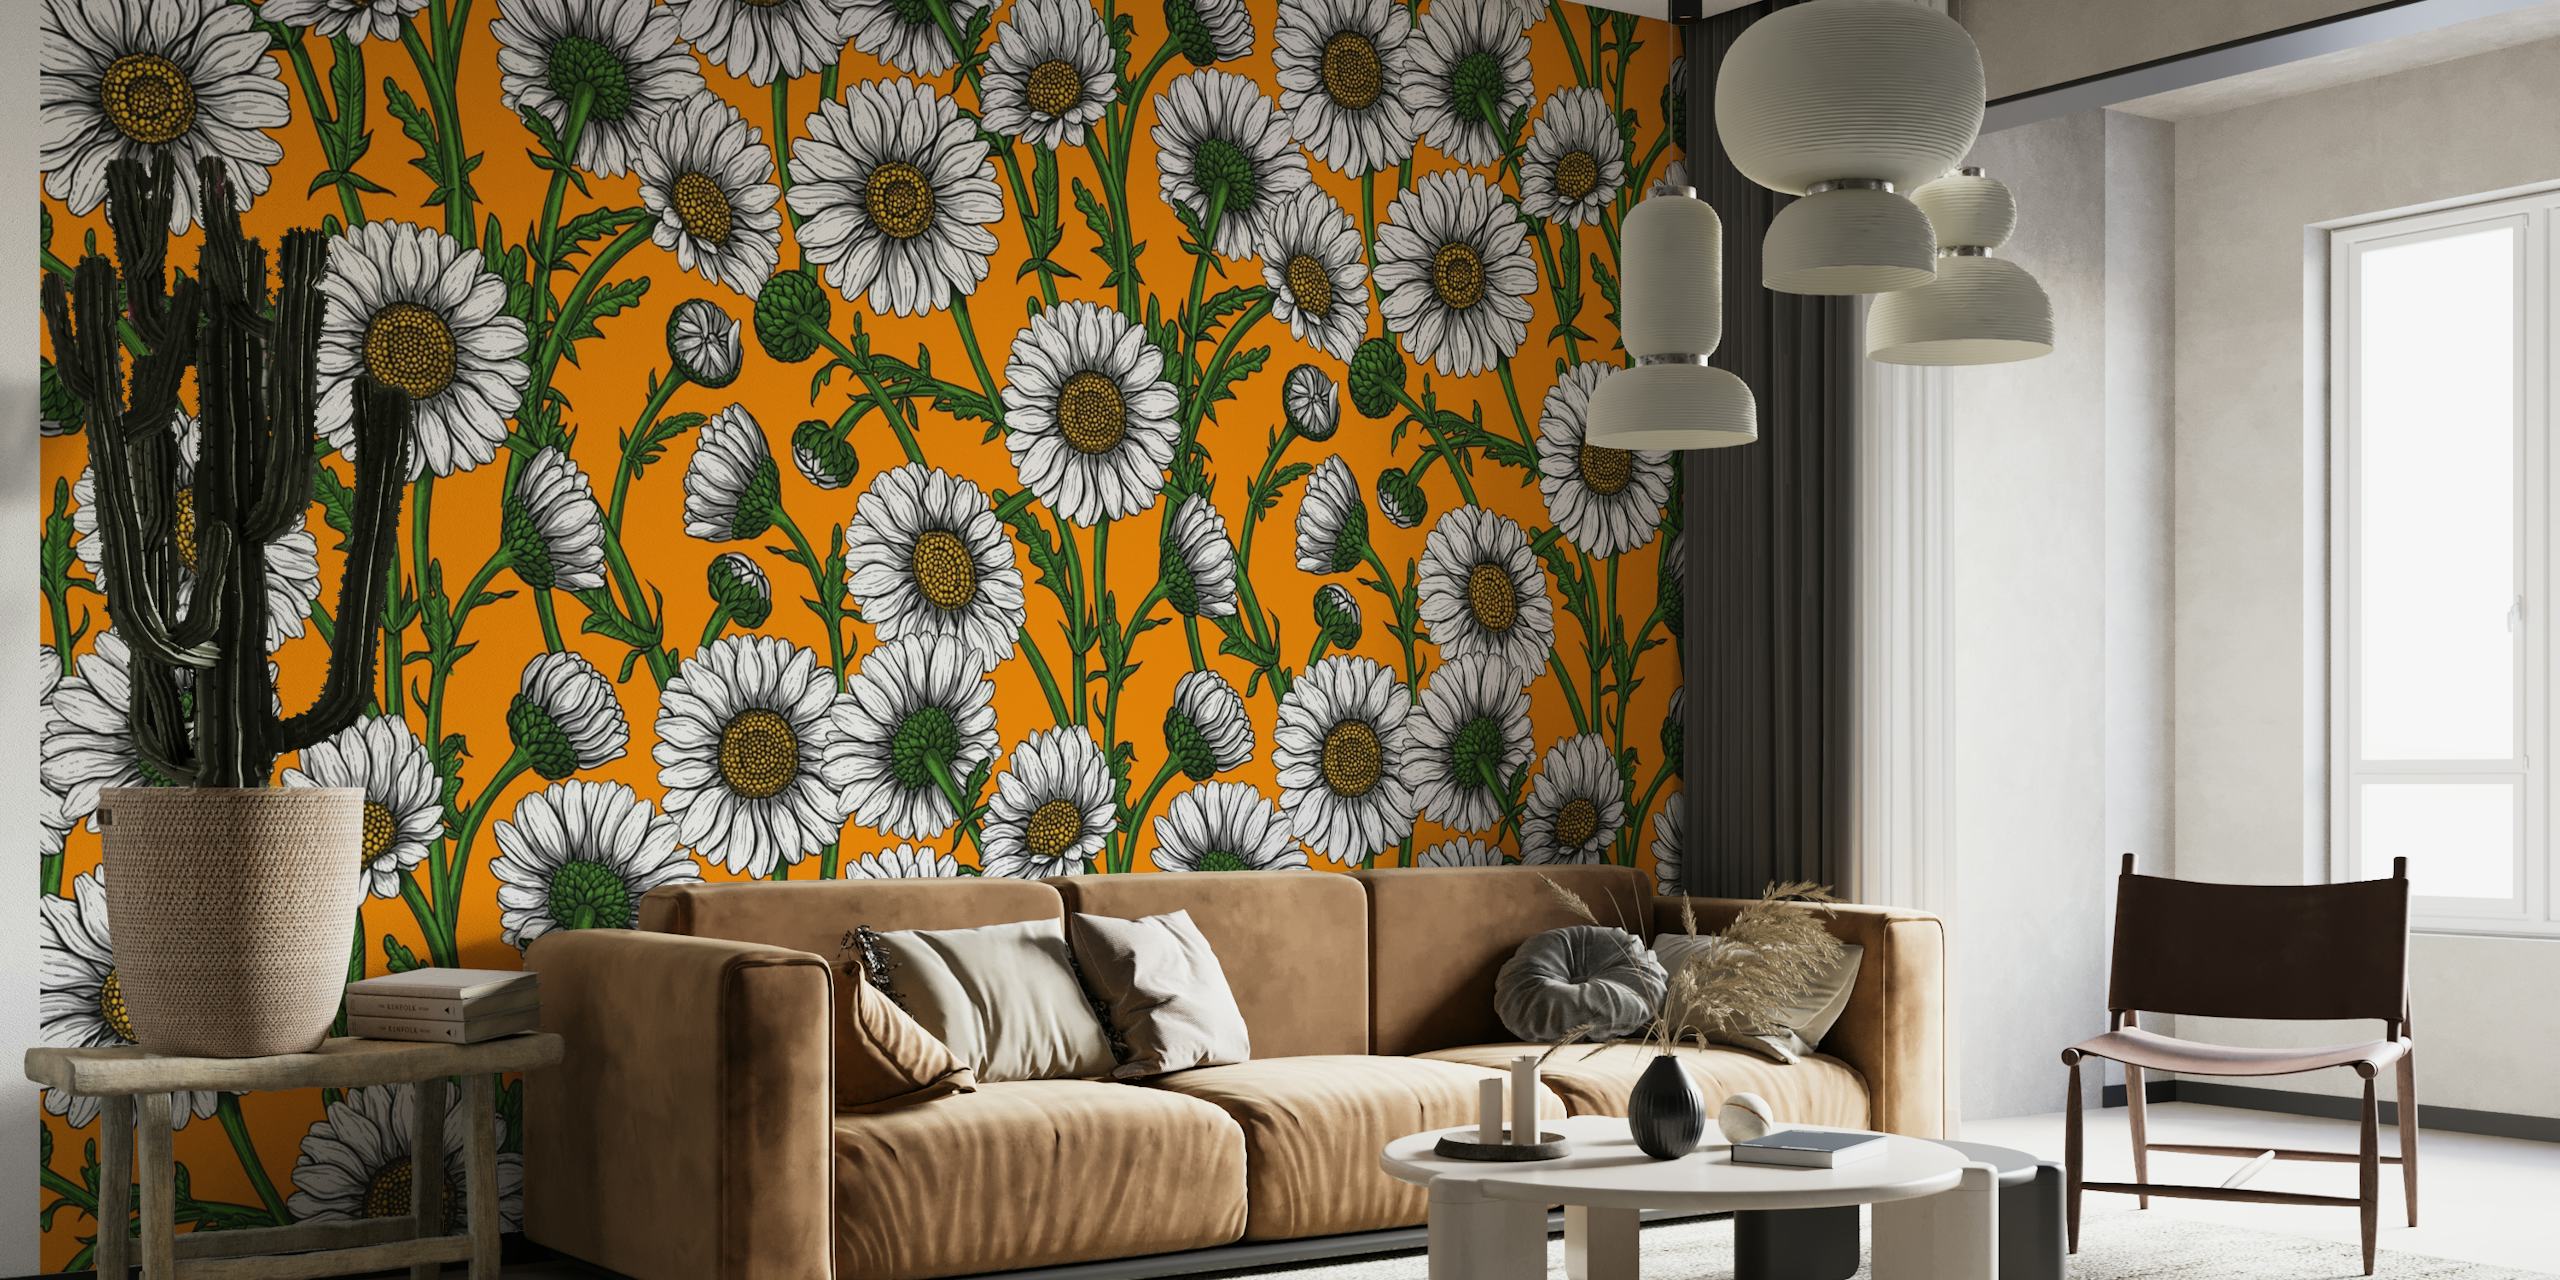 Wall mural with white daisies on a vivid orange background